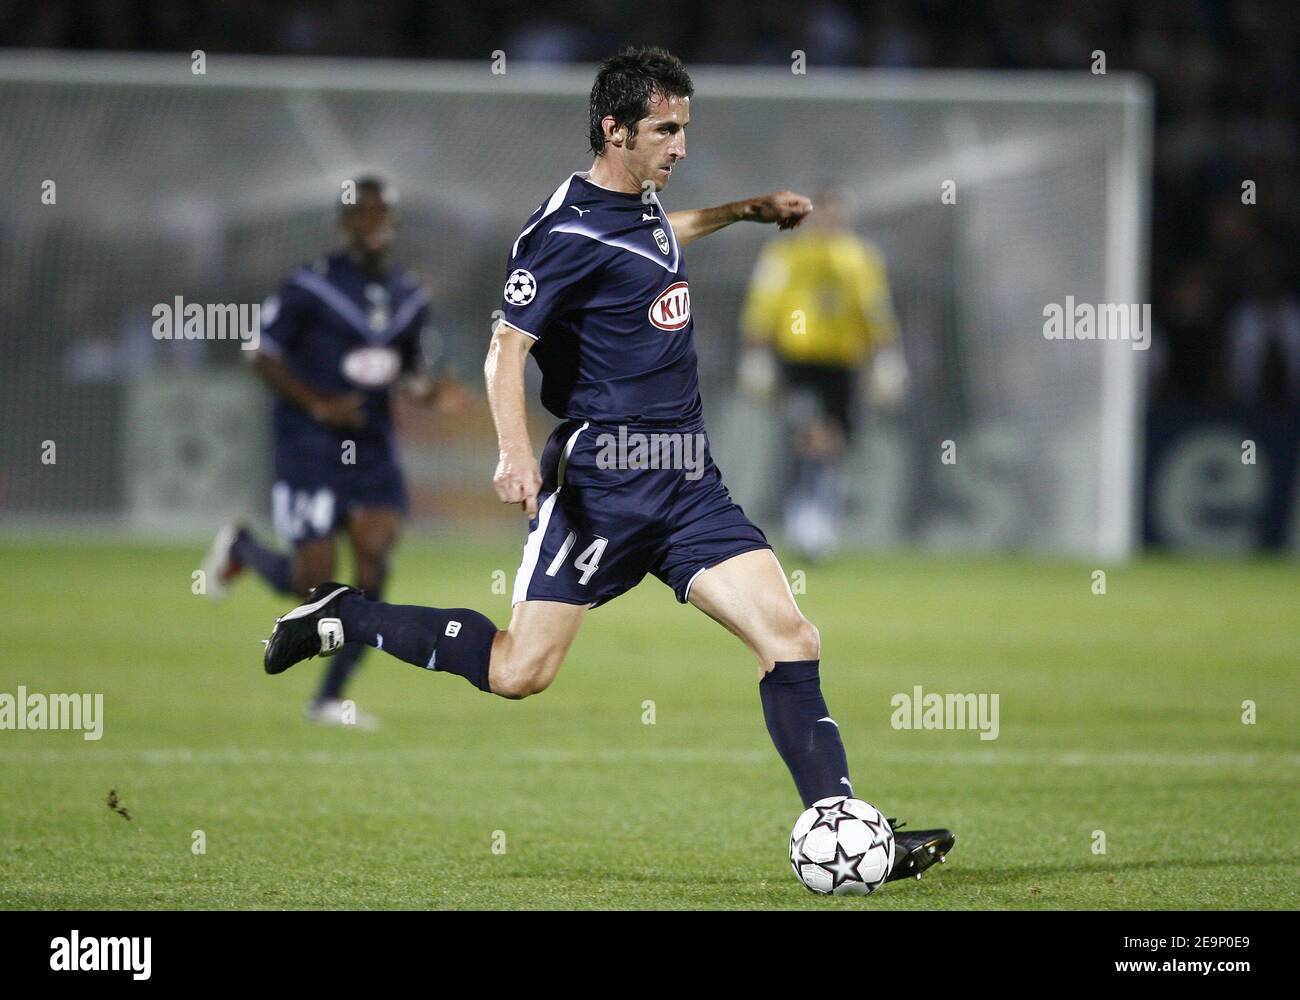 Bordeaux' Johan Micoud during the UEFA Champions League, Group C, Girondins de Bordeaux vs Liverpool FC at the Stade Chaban-Delmas in Bordeaux, France on October 18, 2006. Liverpool won 1-0. Photo by Christian Liewig/ABACAPRESS.COM Stock Photo